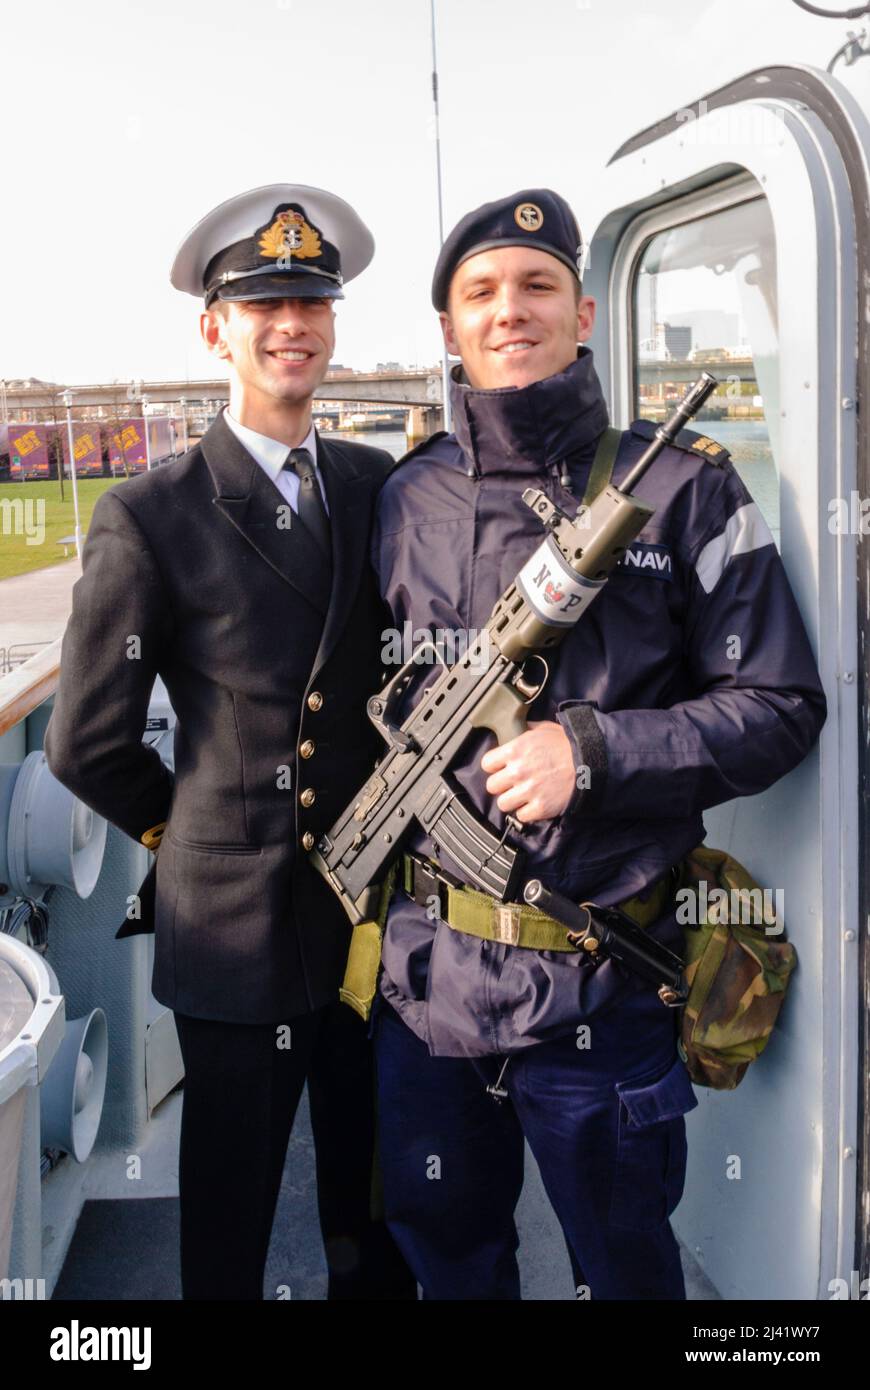 Belfast, Northern Ireland.  13th April 2008.  Captain and marine from HMS Bangor. Stock Photo